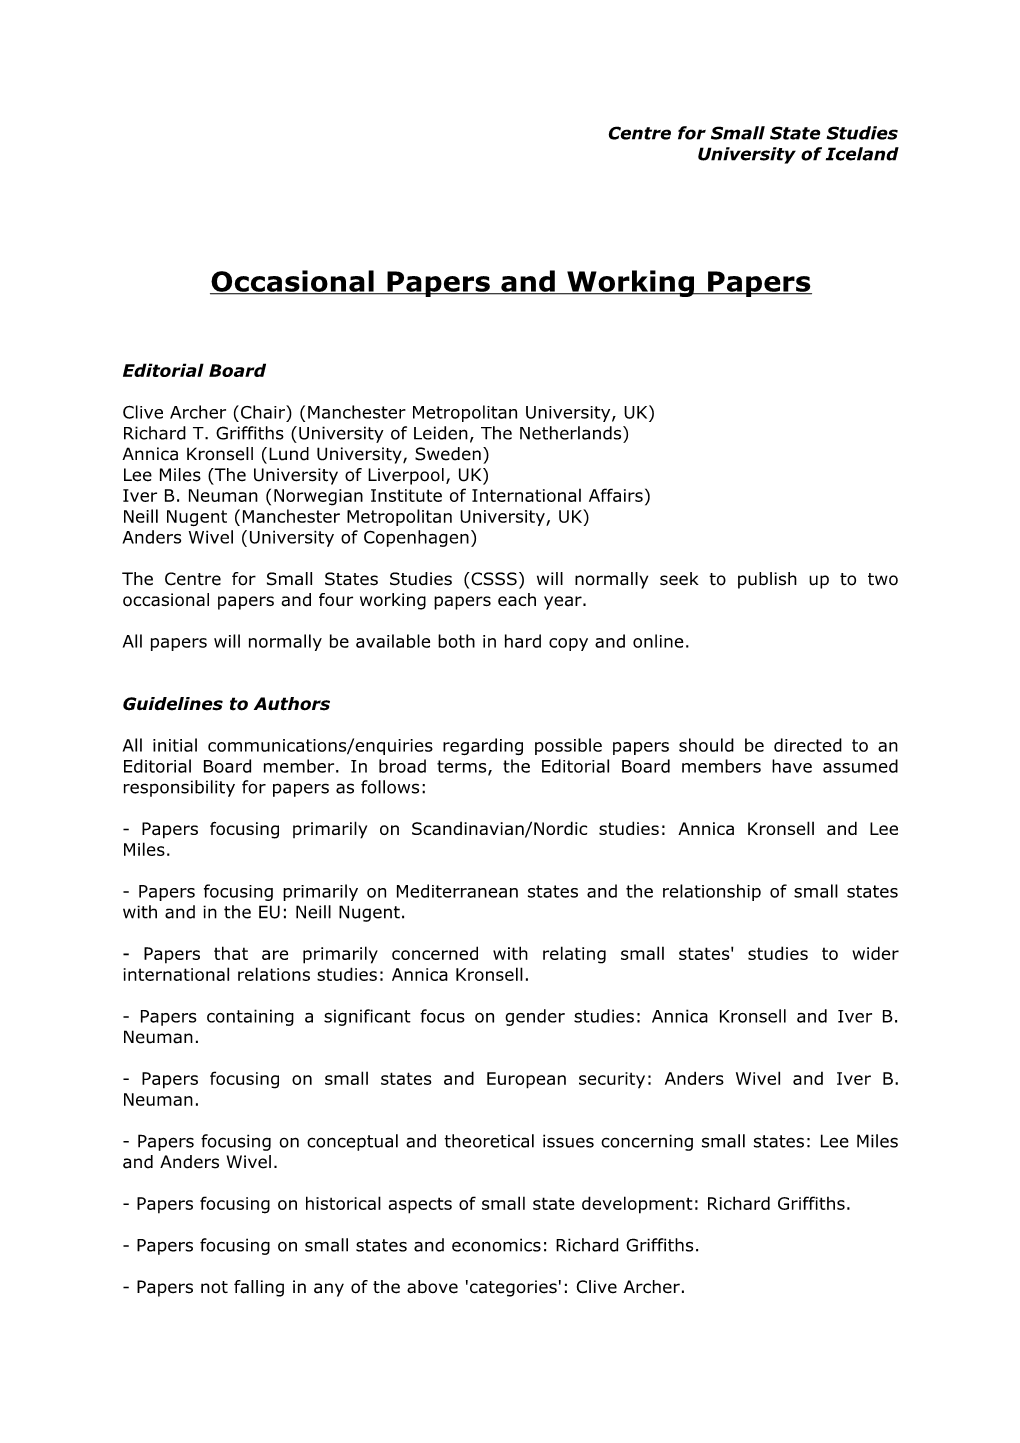 Occasional Papers and Working Papers